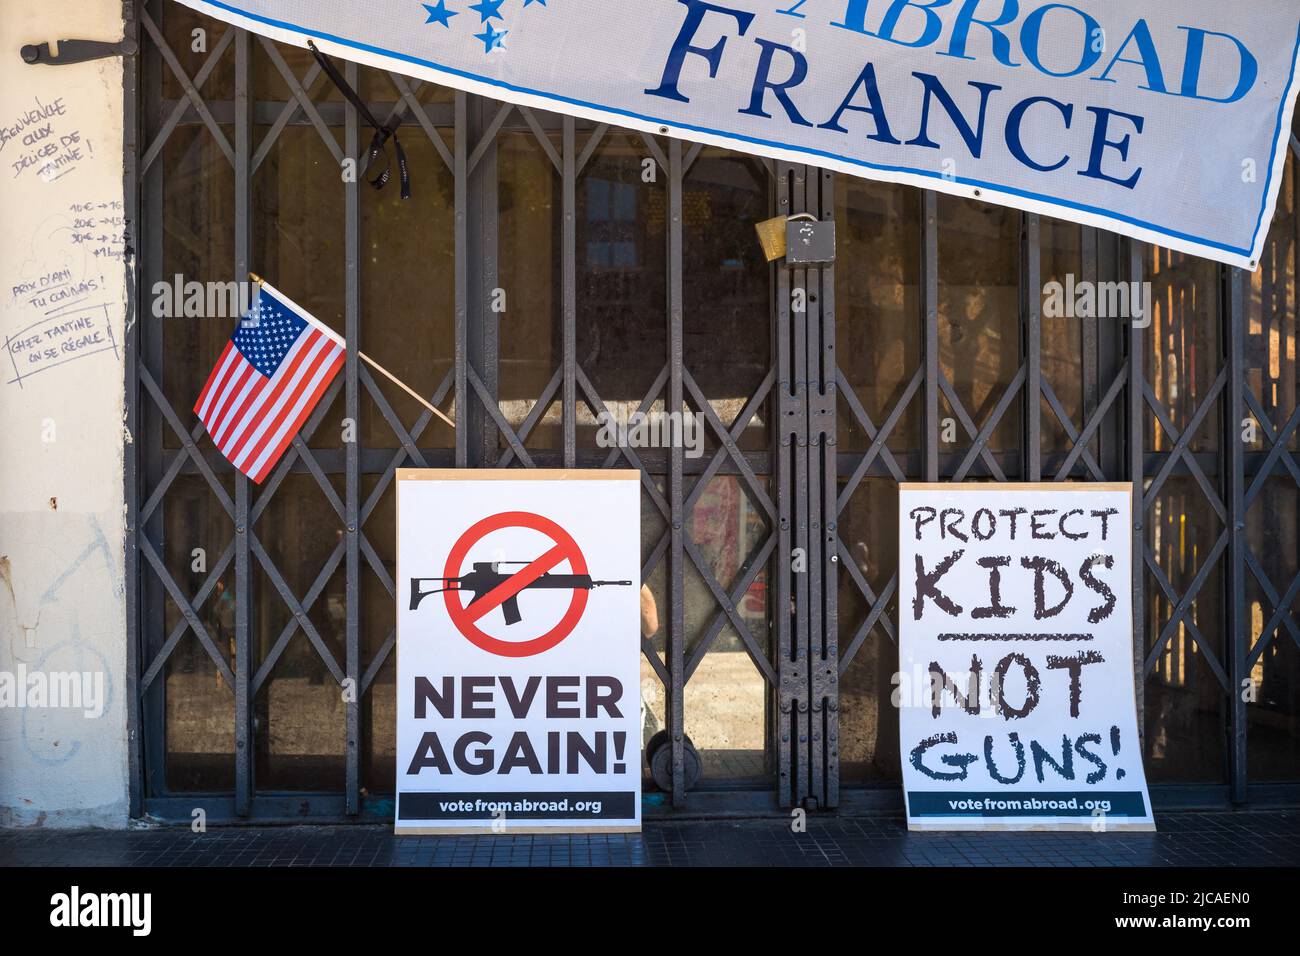 A small American flag, a poster, Never Again! With a forbidden weapon and another poster with the inscription, Protect Kids, not Guns!. Democratic Party rally abroad to honor the victims of the Robb Elementary School killing in Uvalde, Texas on May 24, 2022. France, Toulouse le 11 Juin 2022. Photo by Patricia Huchot-Boissier/ABACAPRESS.COM Stock Photo